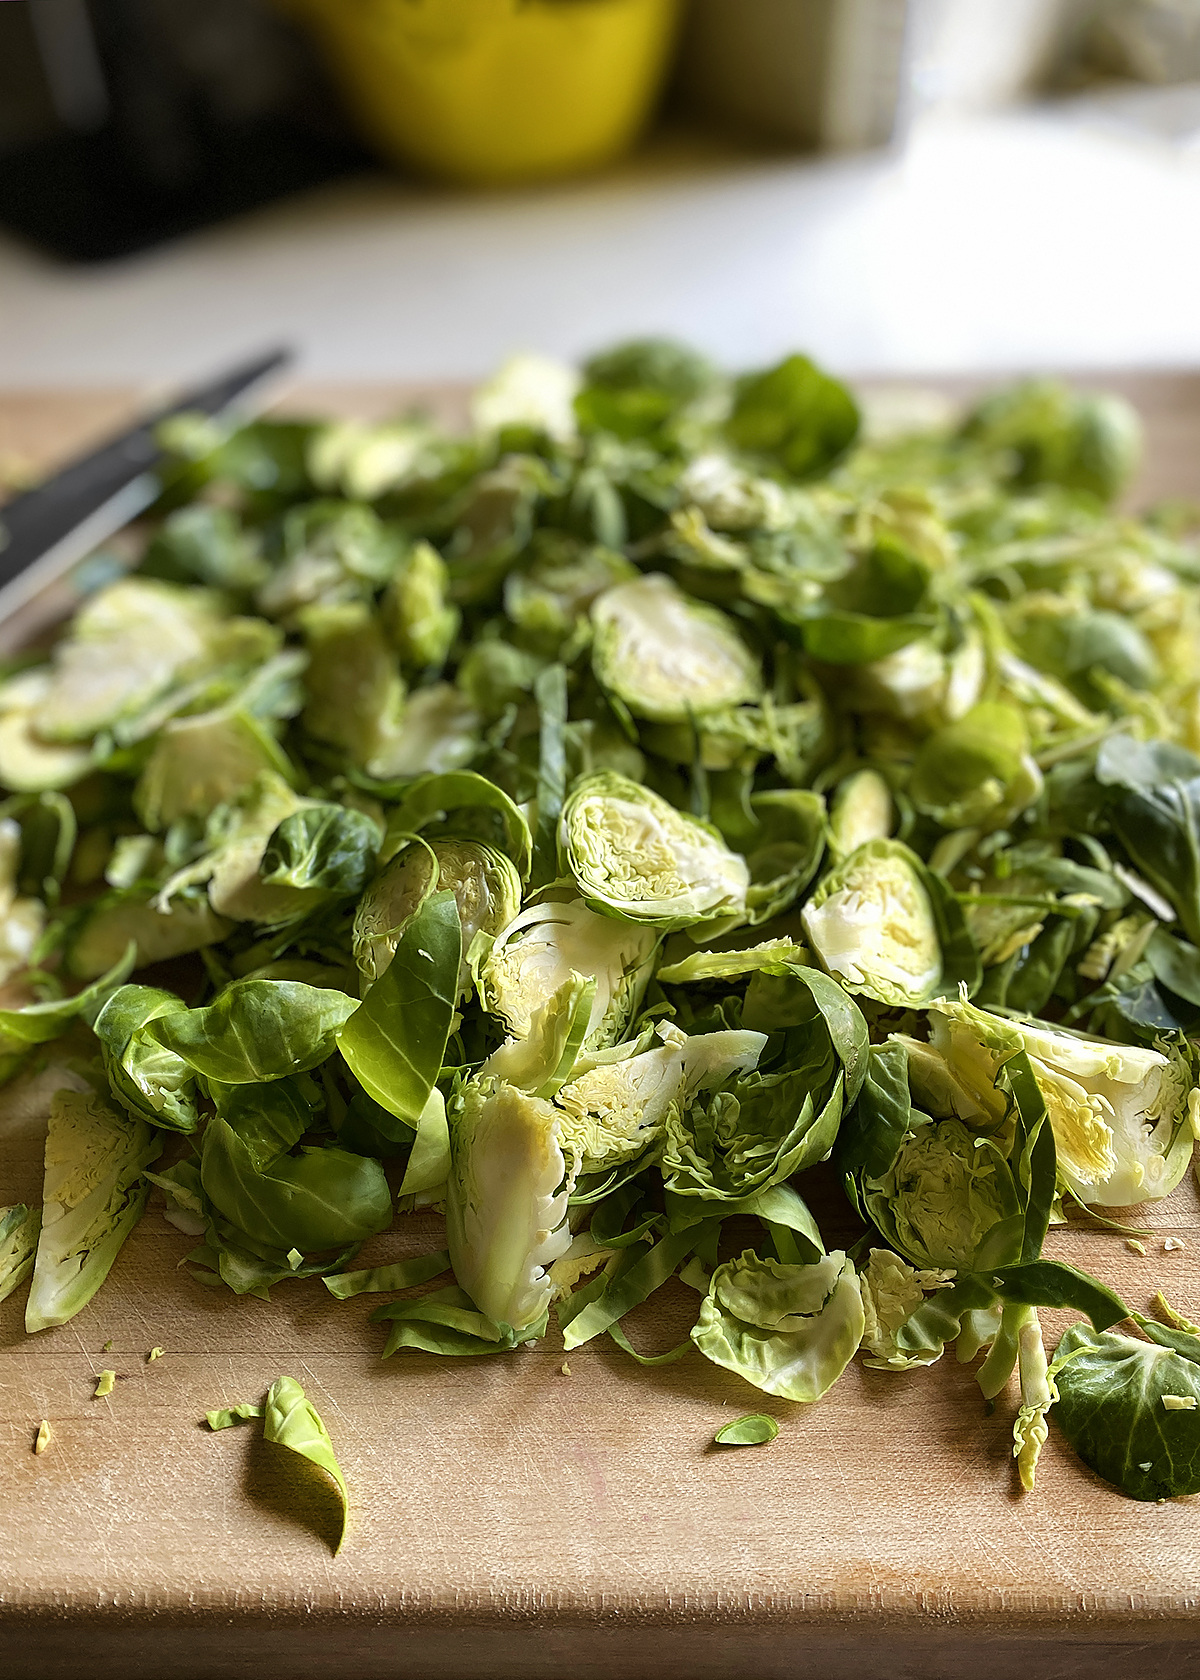 brussels sprouts shredded on cutting board